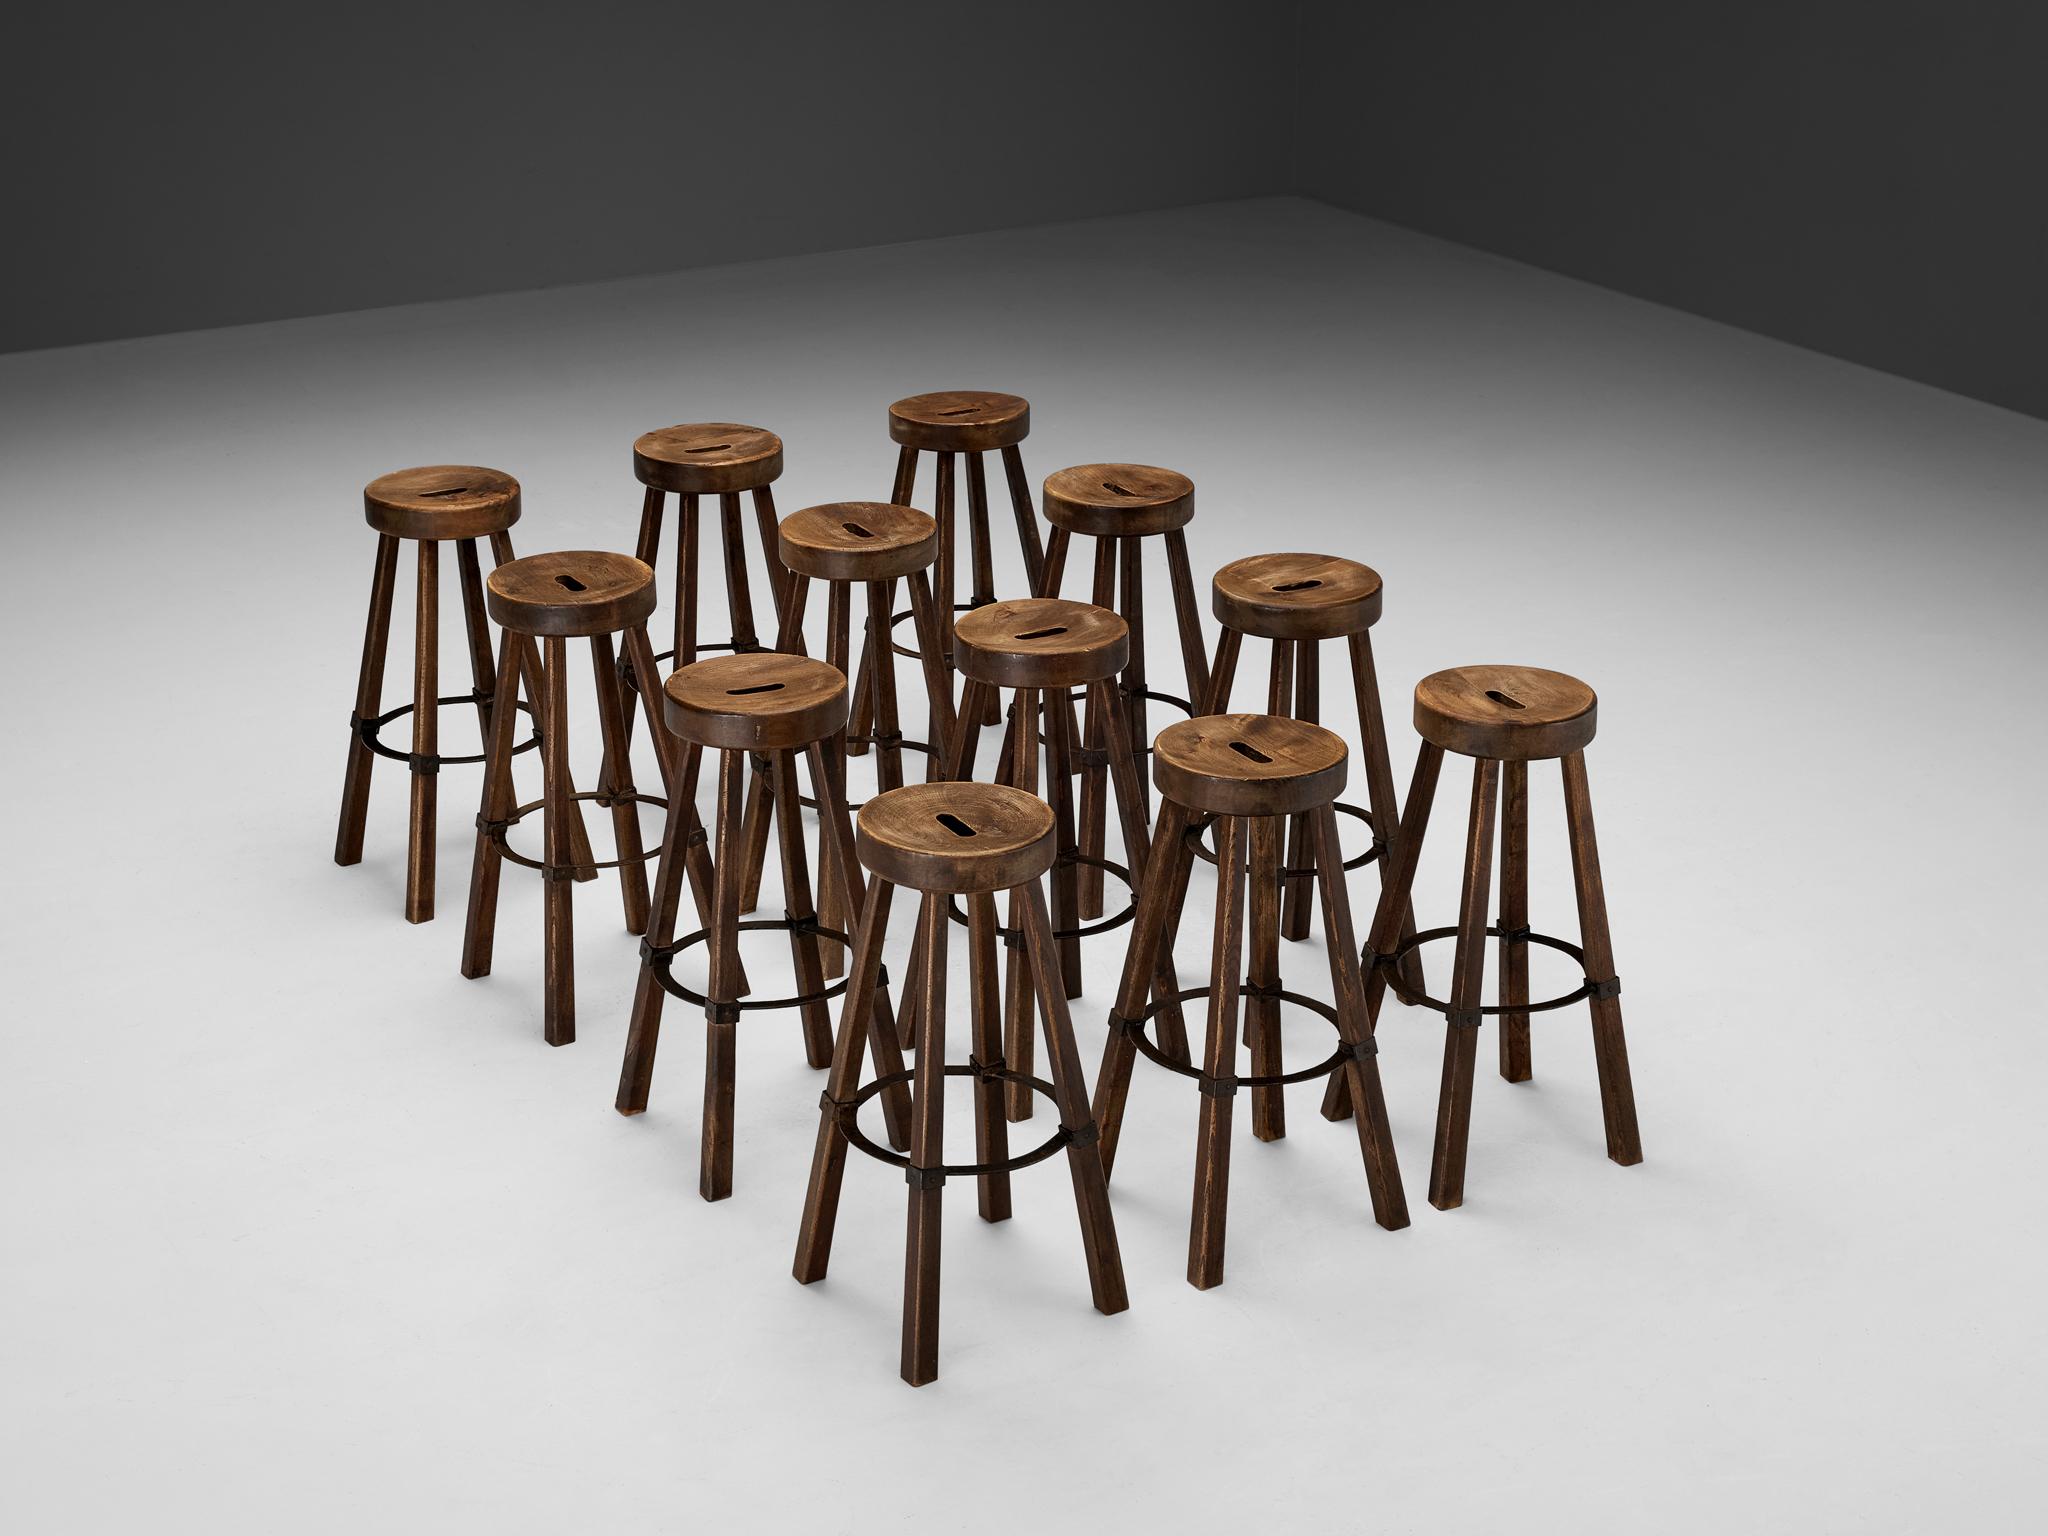 Brutalist bar stools, wood, steel, Europe, 1970s

Exquisite and robust, these bar stools showcases a striking patina that is characteristic of the brutalist design prevalent in the 1970s. With a seat carved out, they effortlessly merge form with